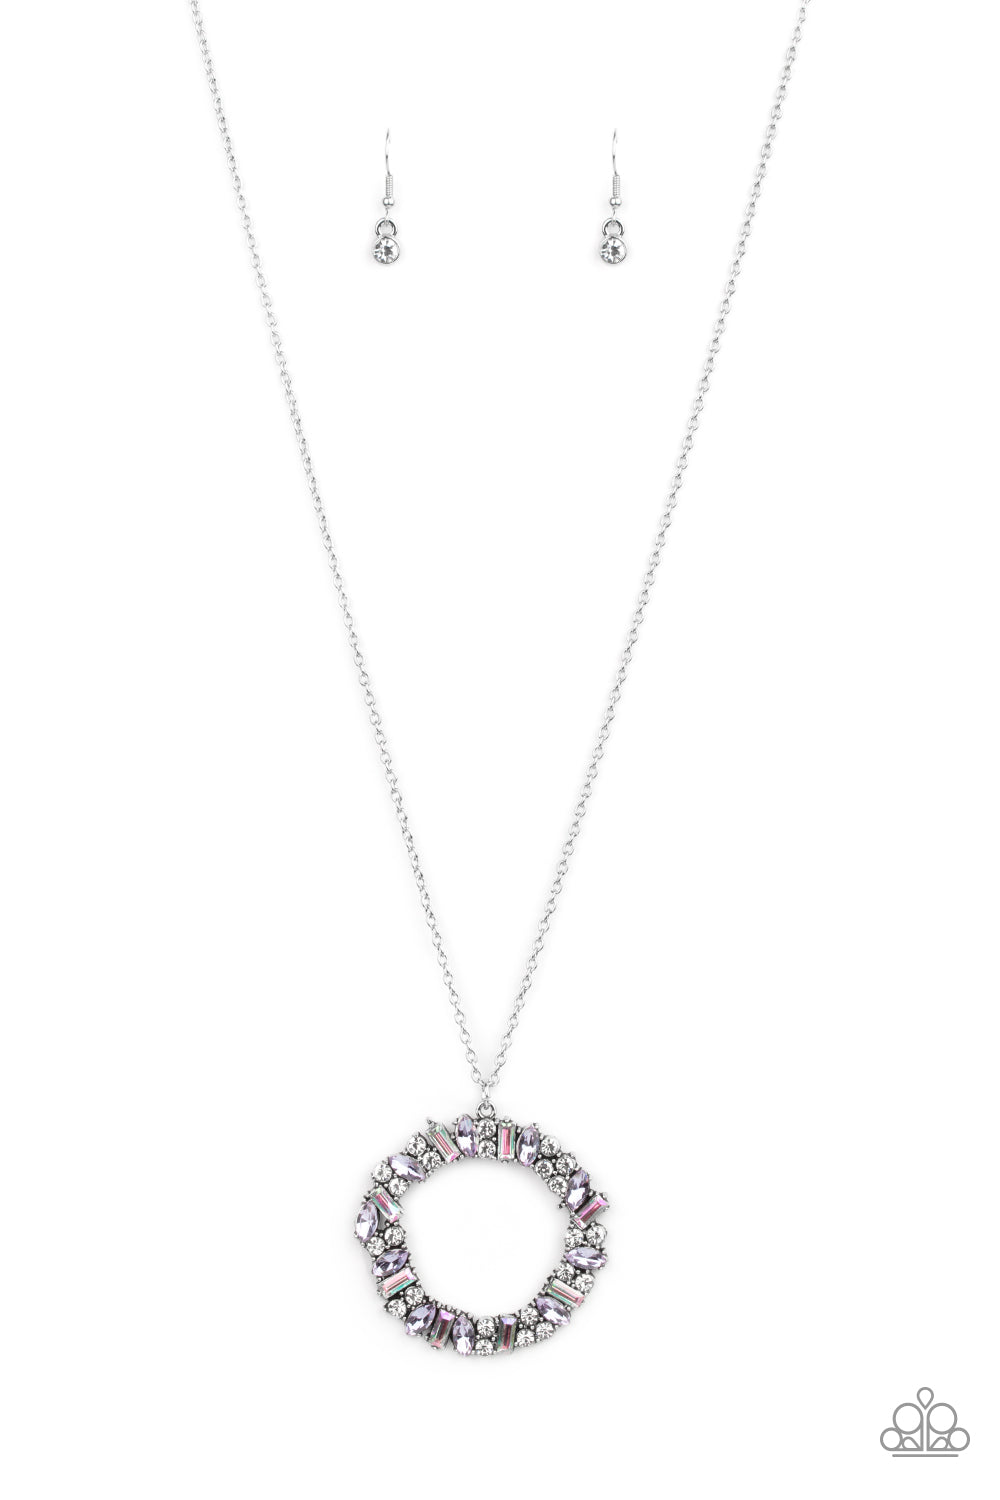 Wreathed in Wealth Necklace (Purple, Pink)